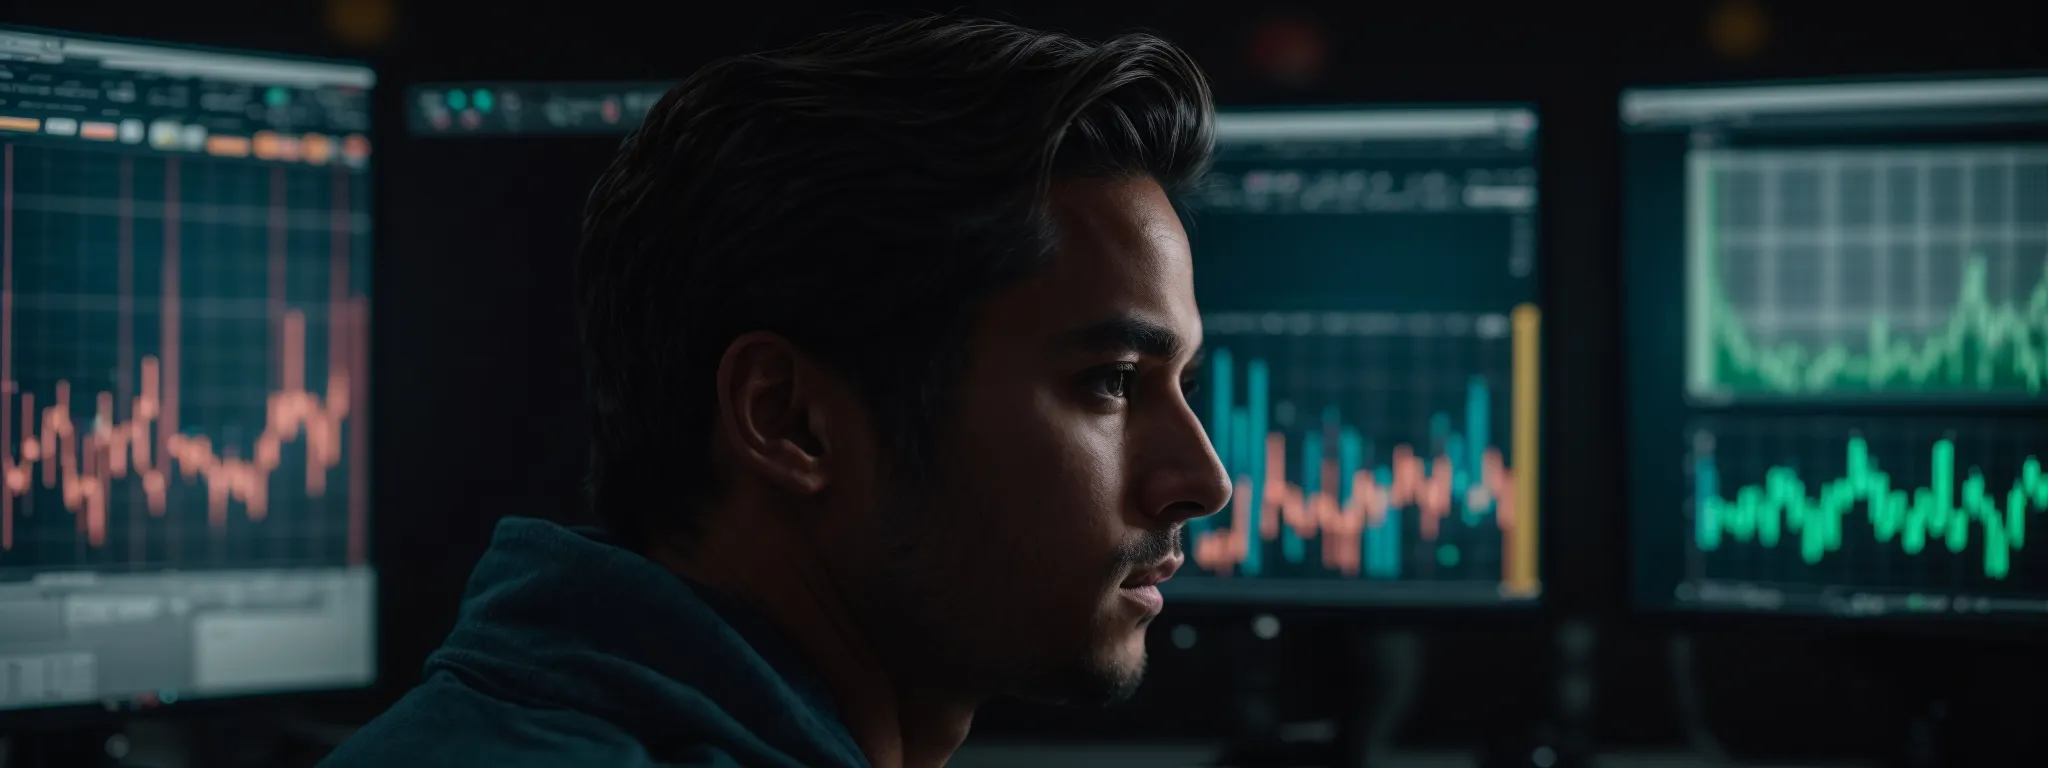 a focused individual gazes intently at a large, vibrant computer screen displaying fluctuating graphs and data analytics.